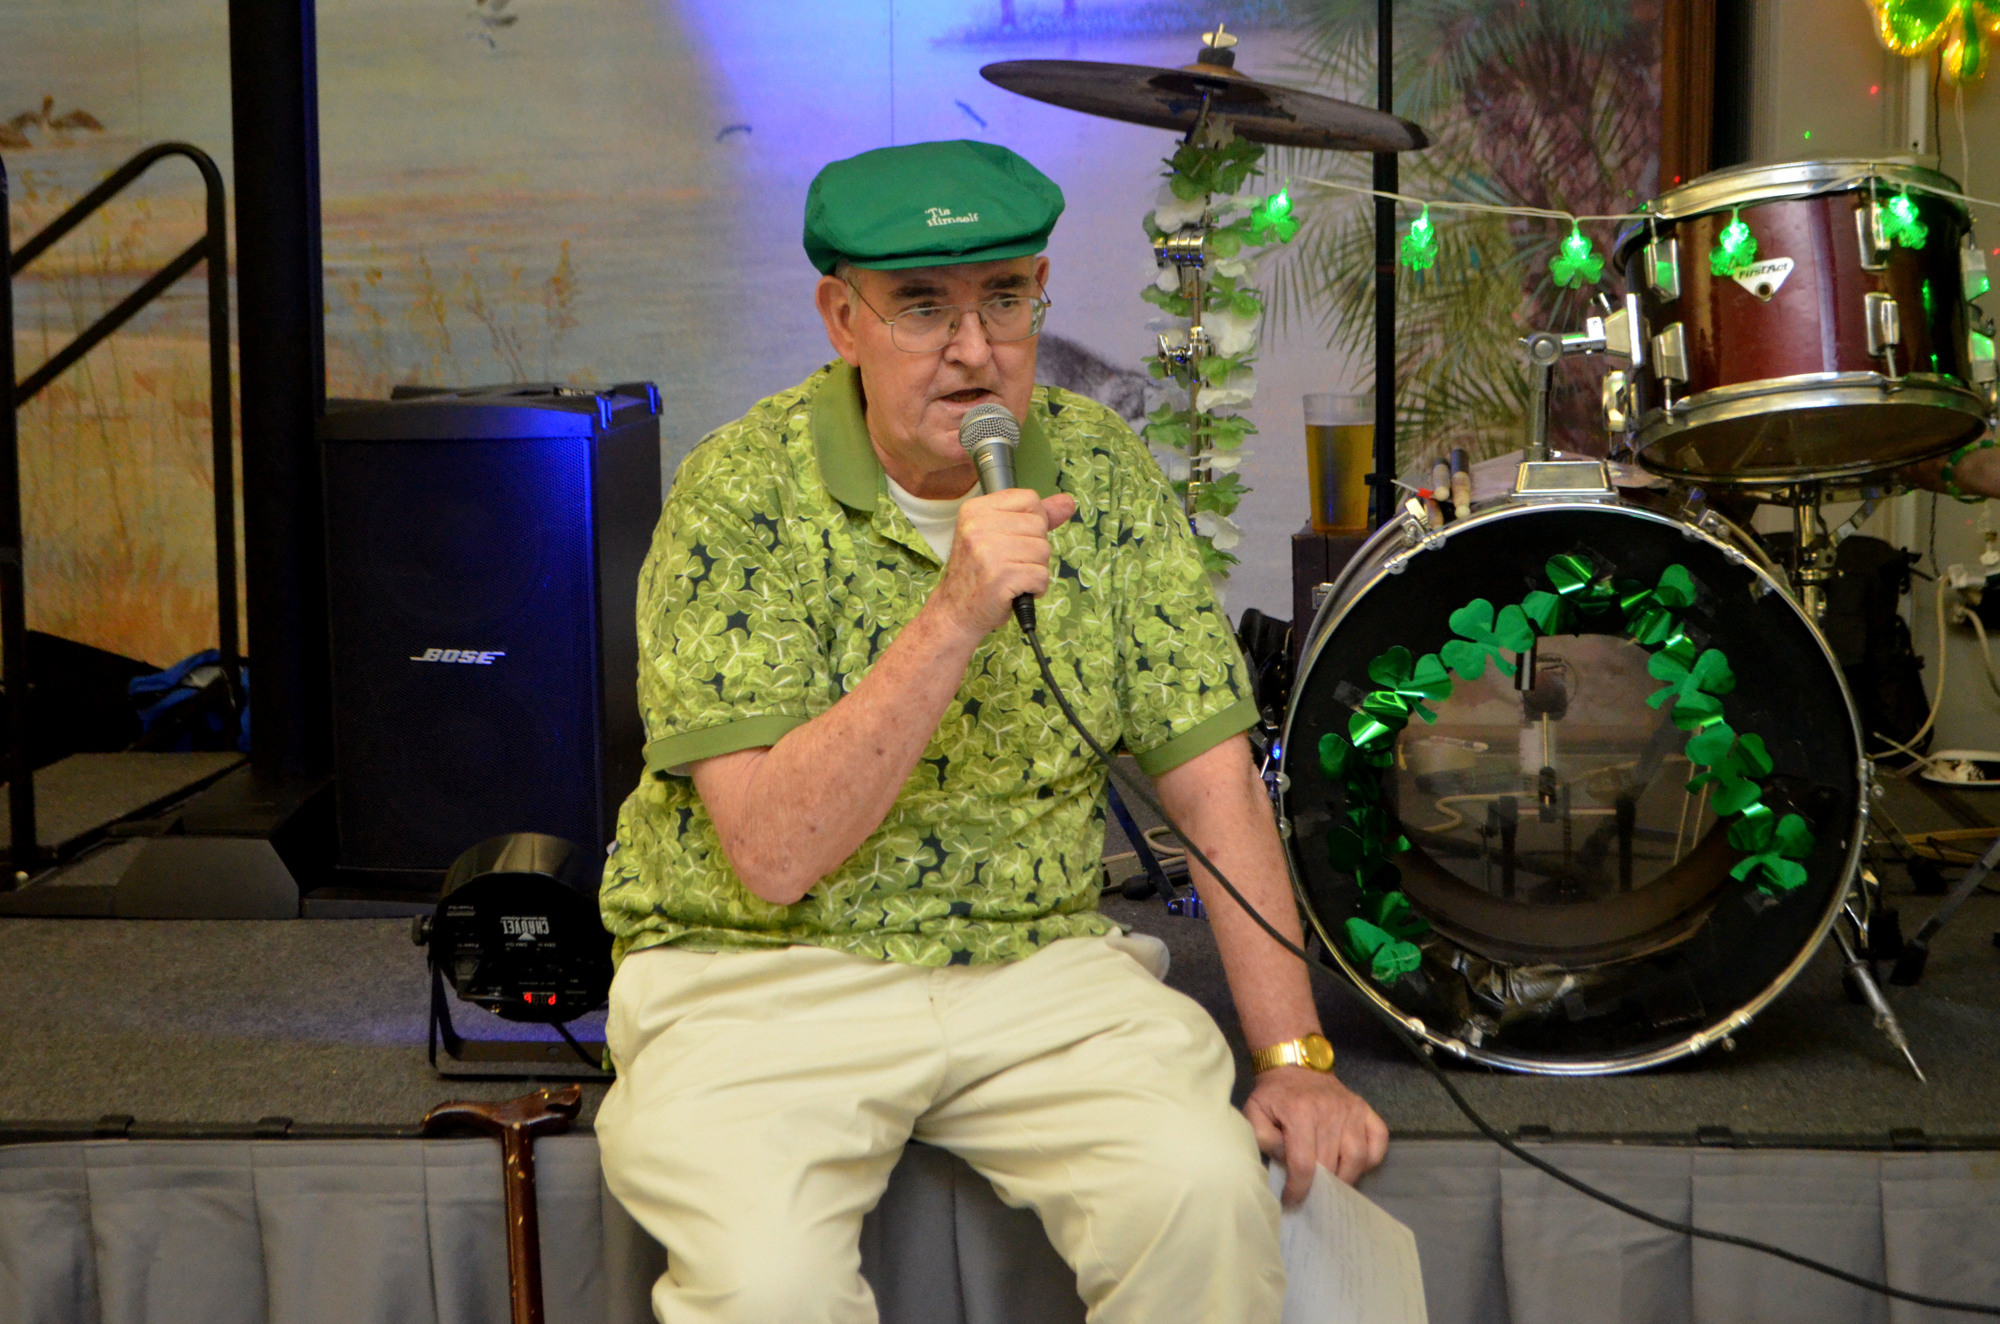 Fr. Gerry sings for the crowd at the St. Mary's St. Patrick's Day Party in March.